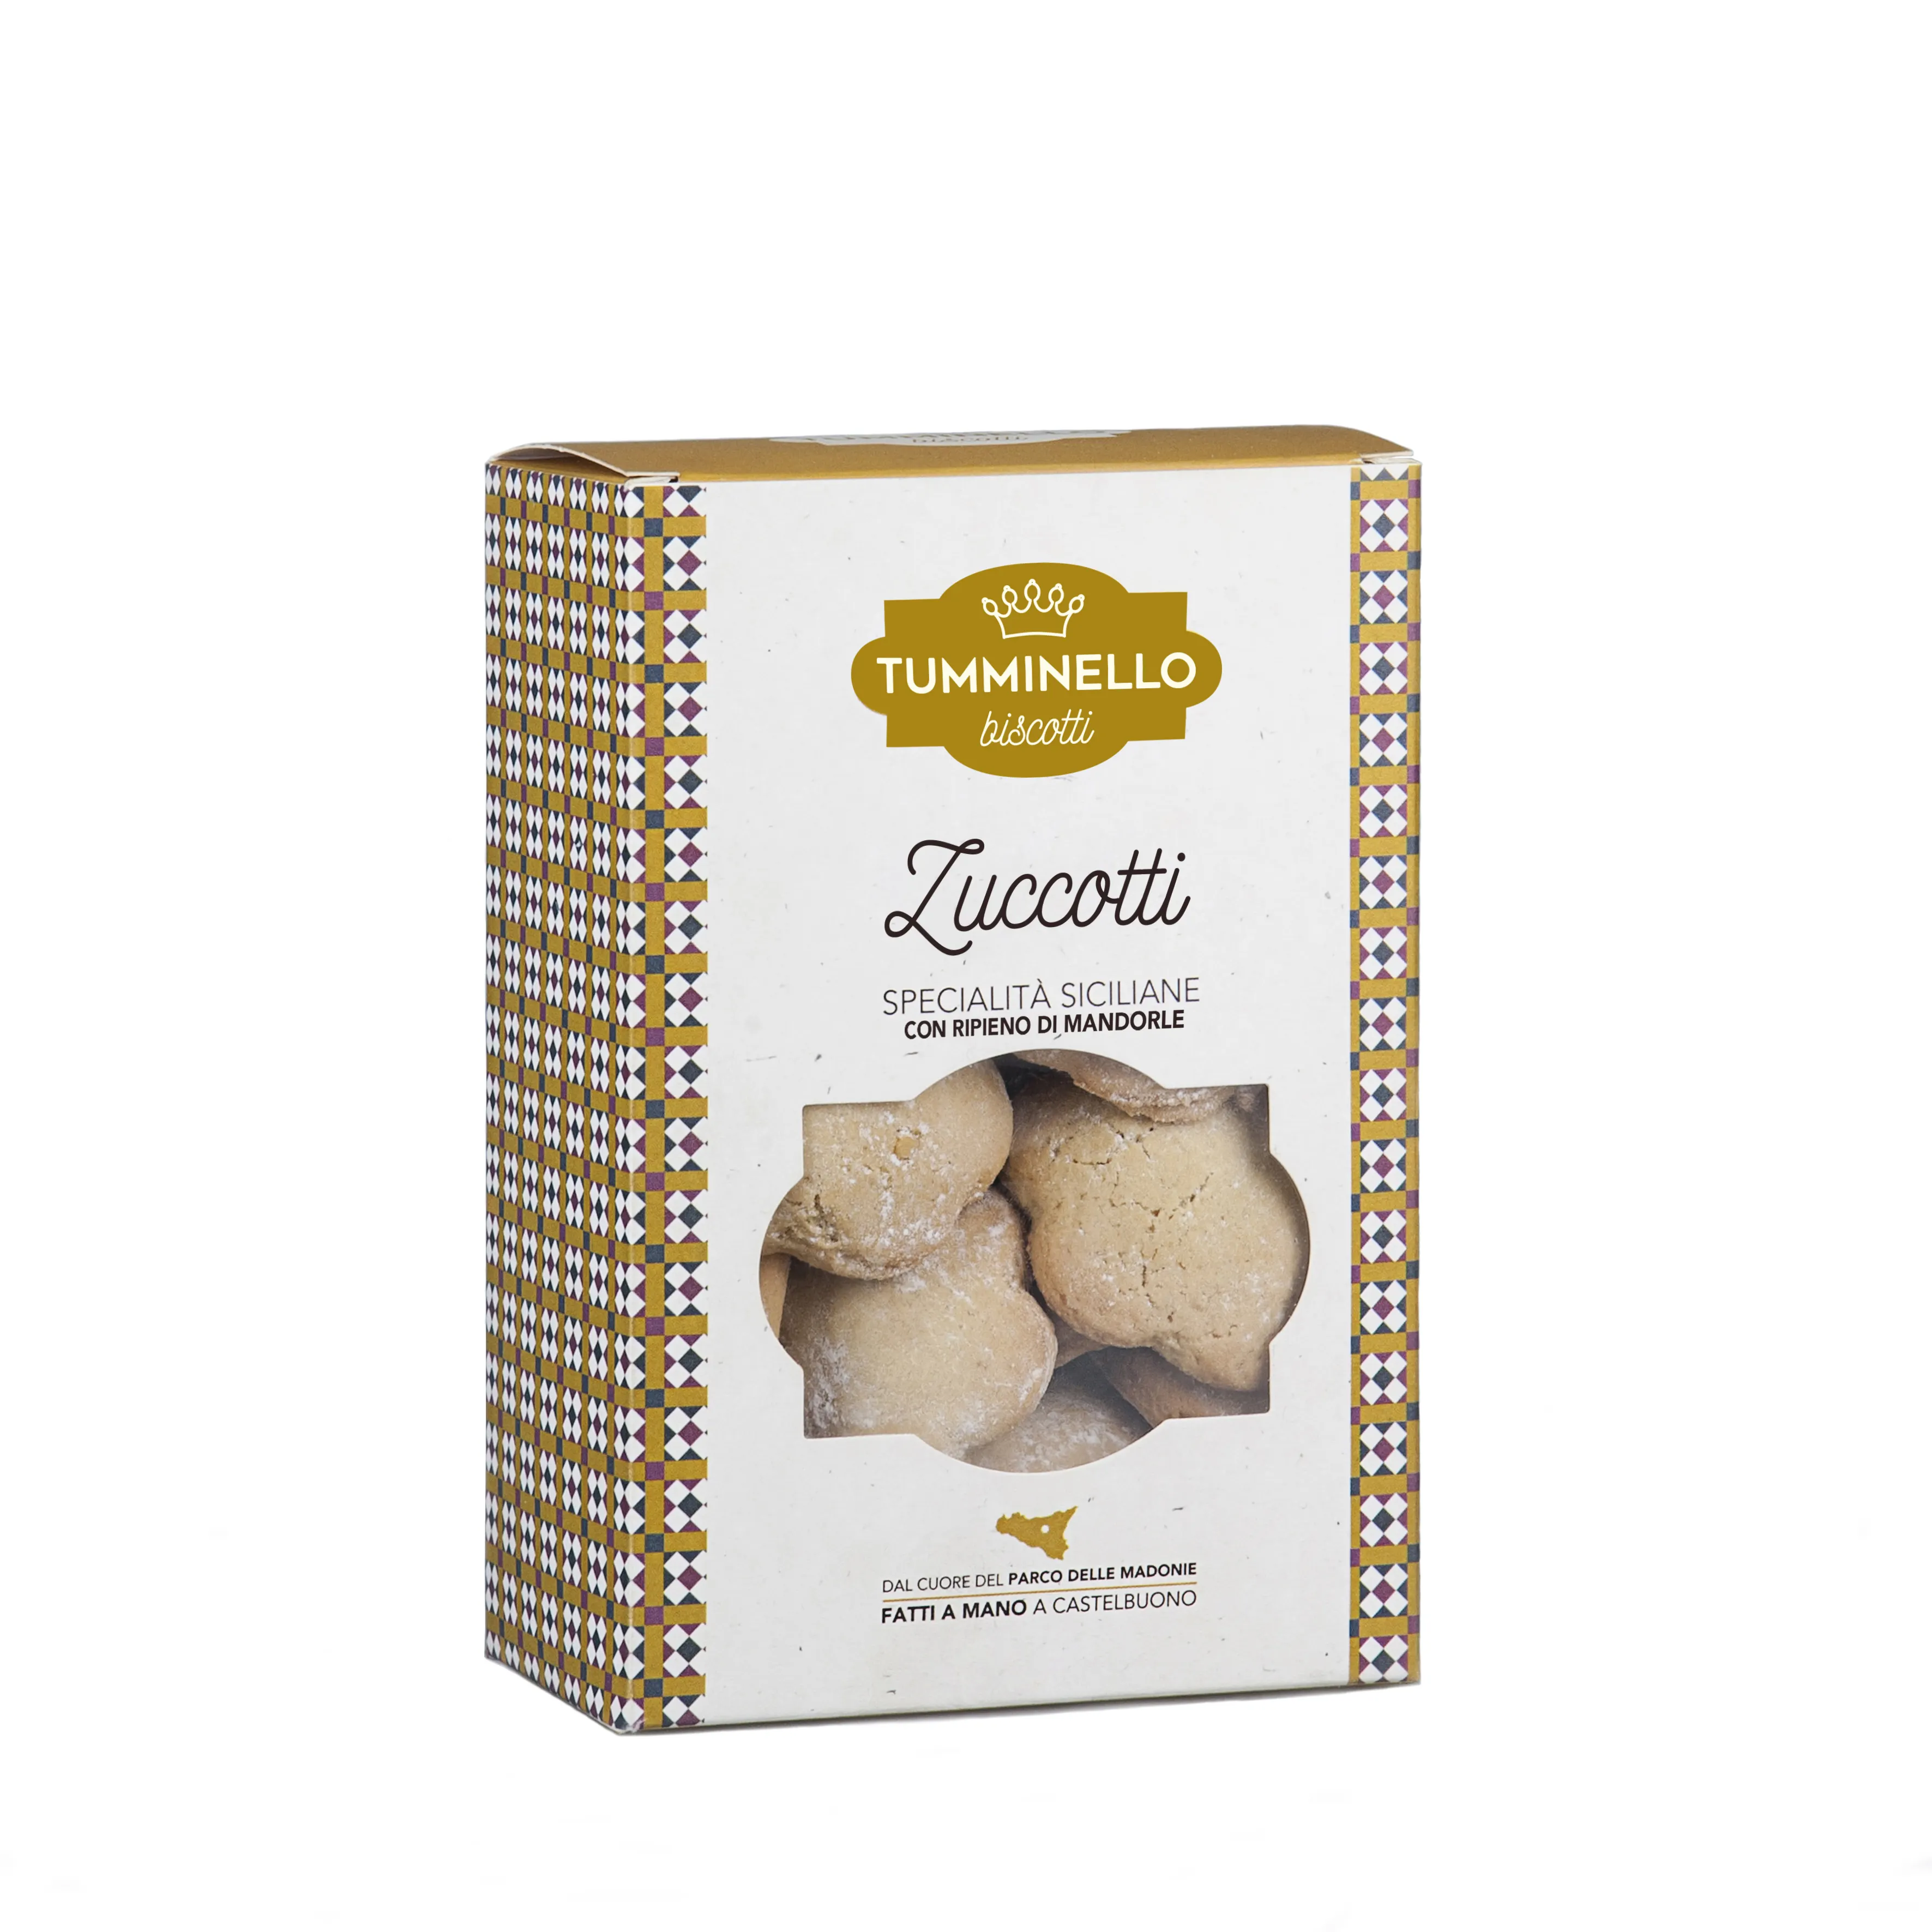 Made in Italy Biscuits 320g No Preservaties No Palm Oil No Colouring Agents Handcrafted Natural Ingredients Almond Pastries